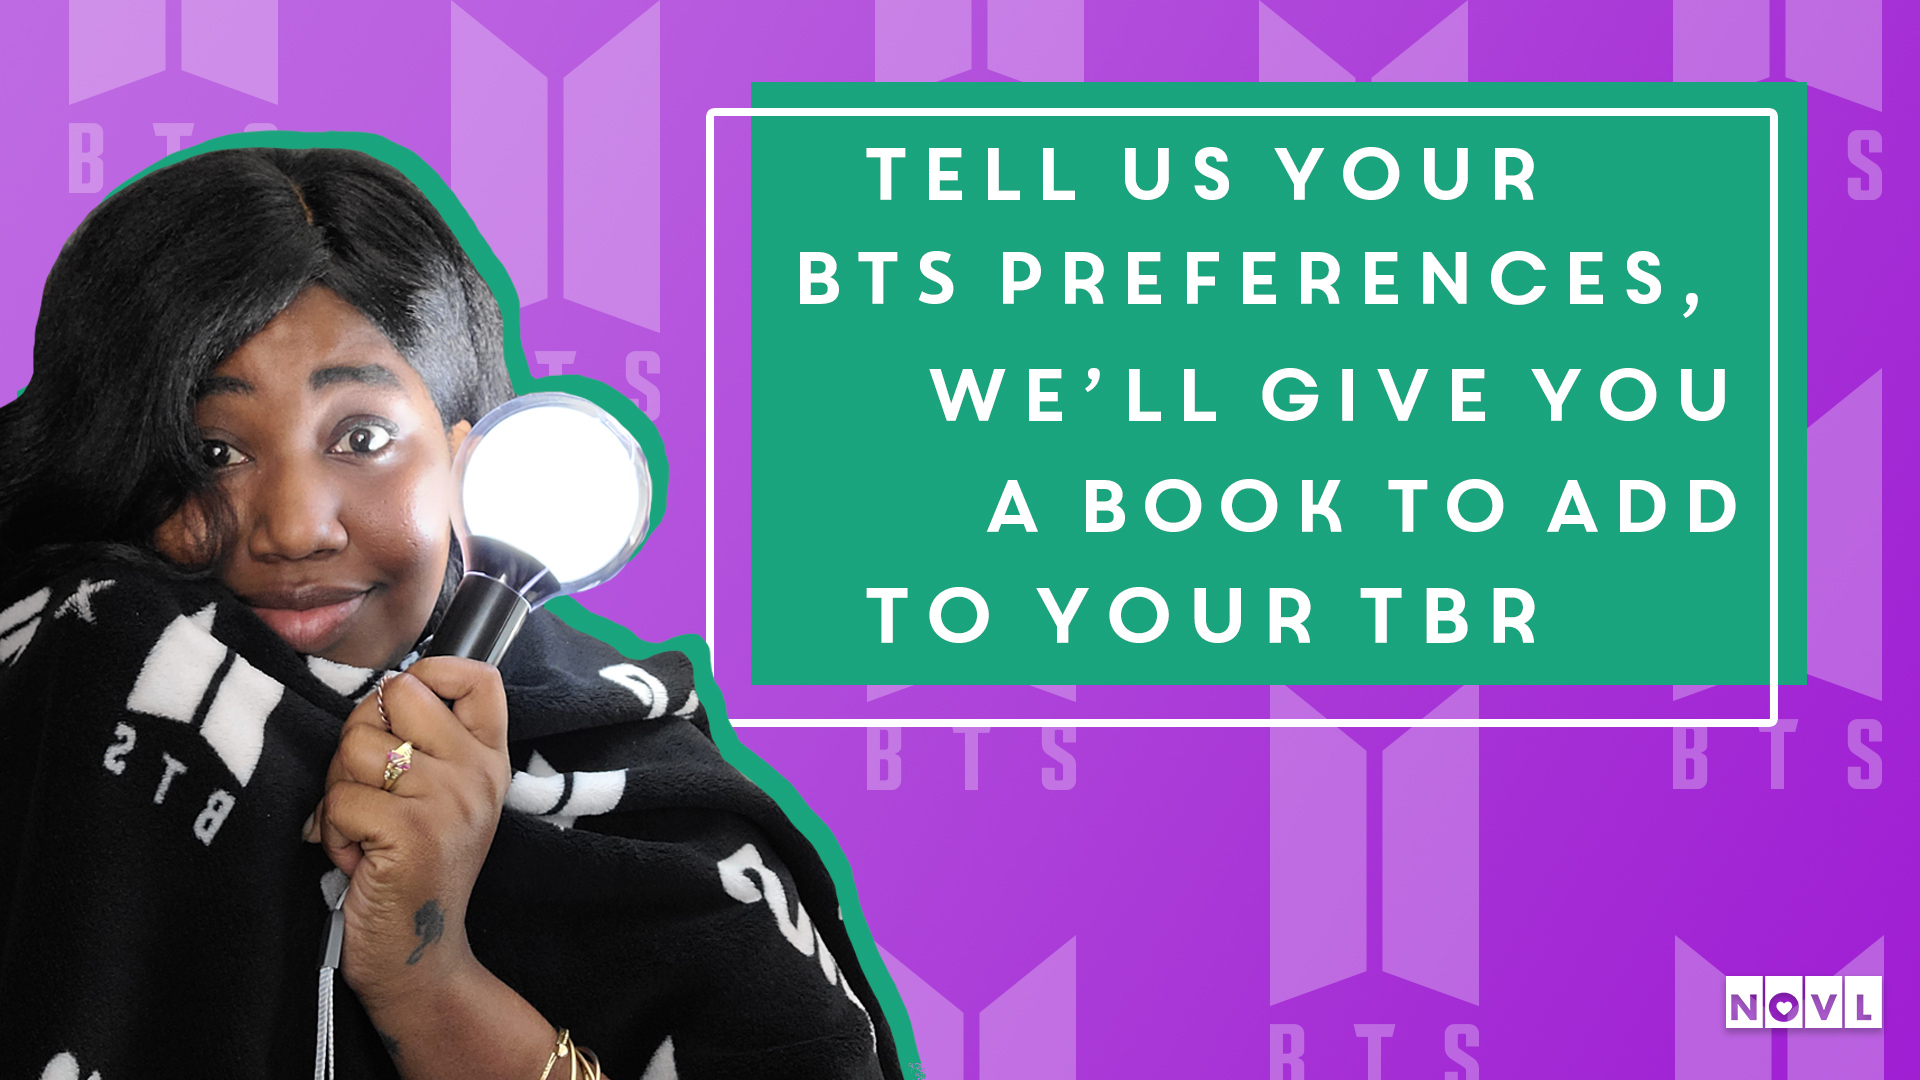 The NOVL Blog, Featured Image for Article: Tell Us Your BTS Preferences, We'll Give You a Book to Add to Your TBR